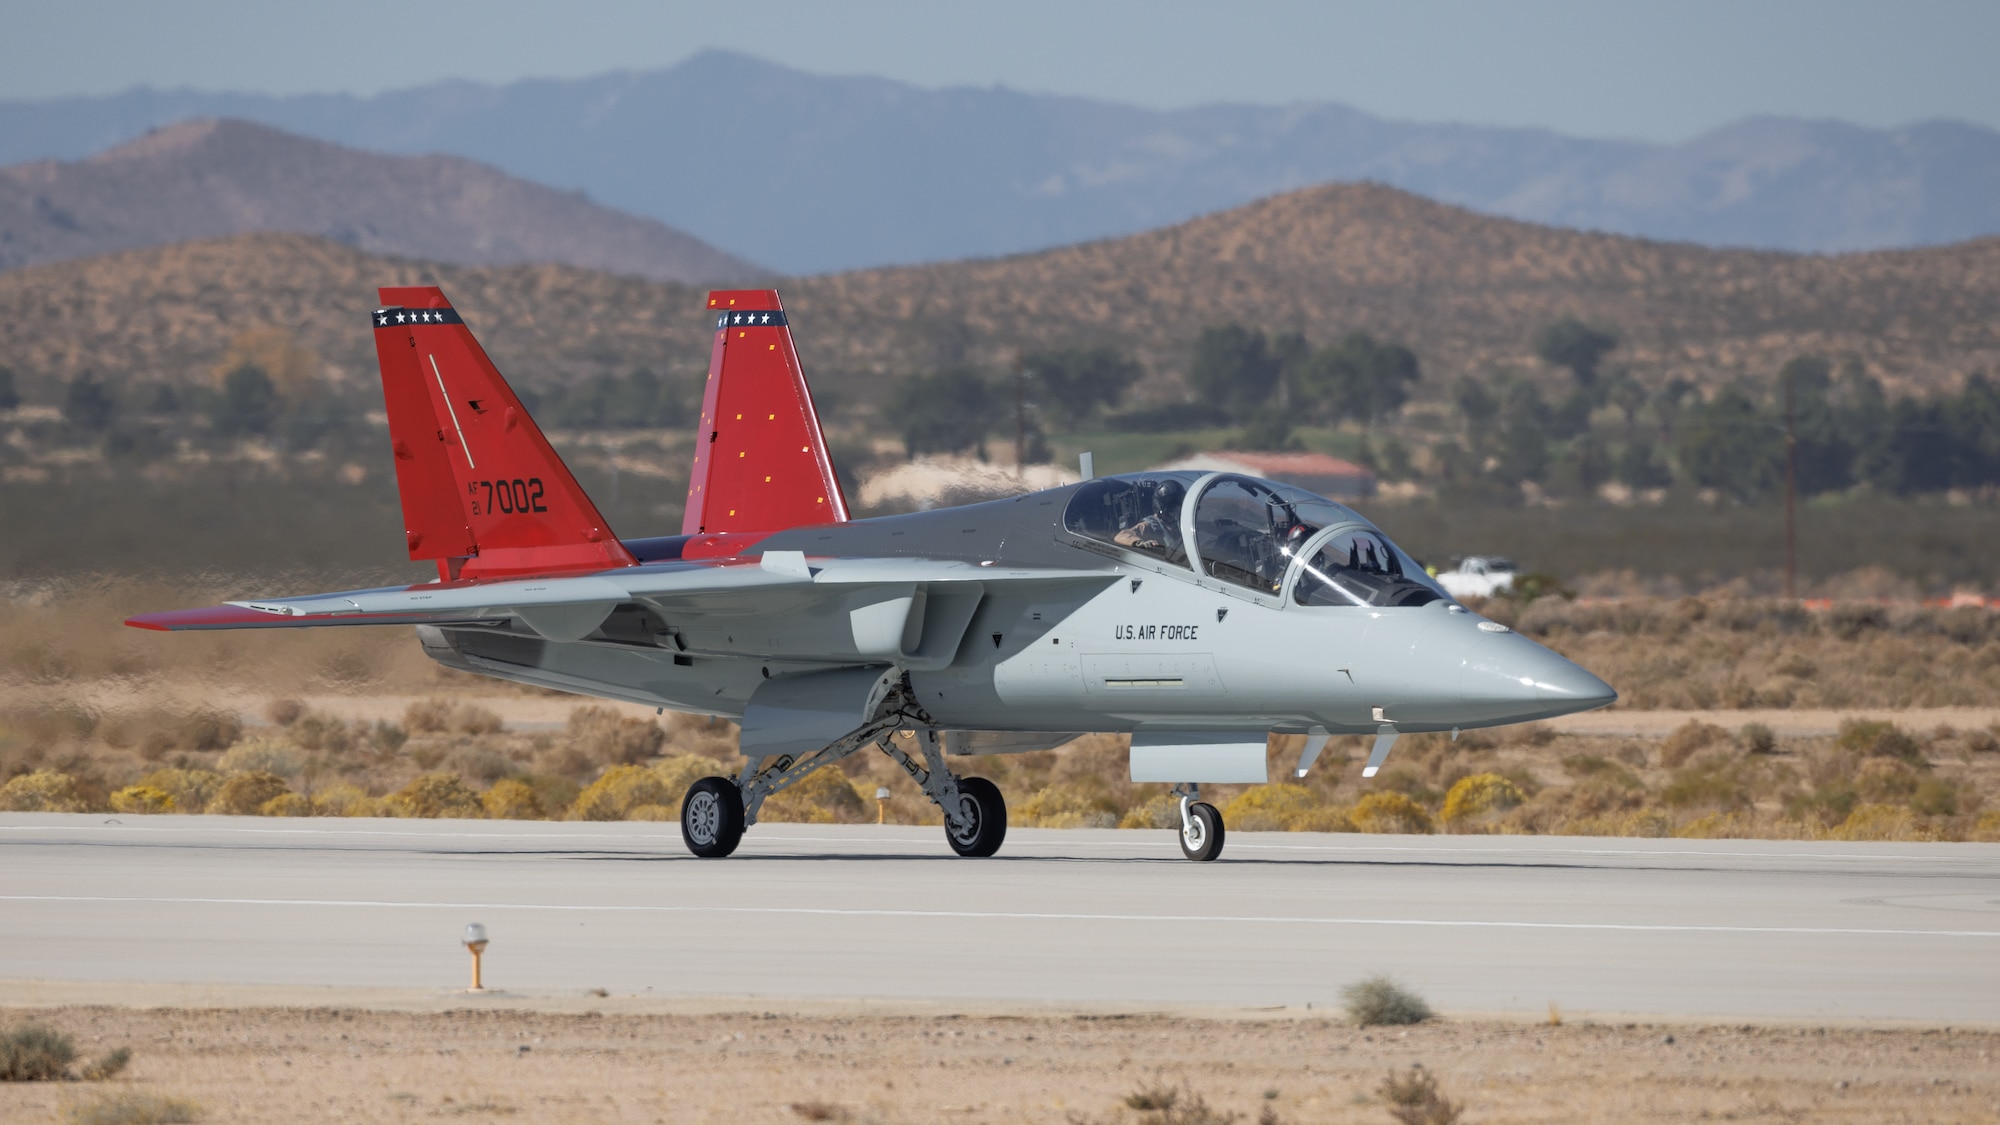 A T-7A Red Hawk arrives at Edwards Air Force Base on November 8. (U.S. Air Force photo/Joshua McClanahan)